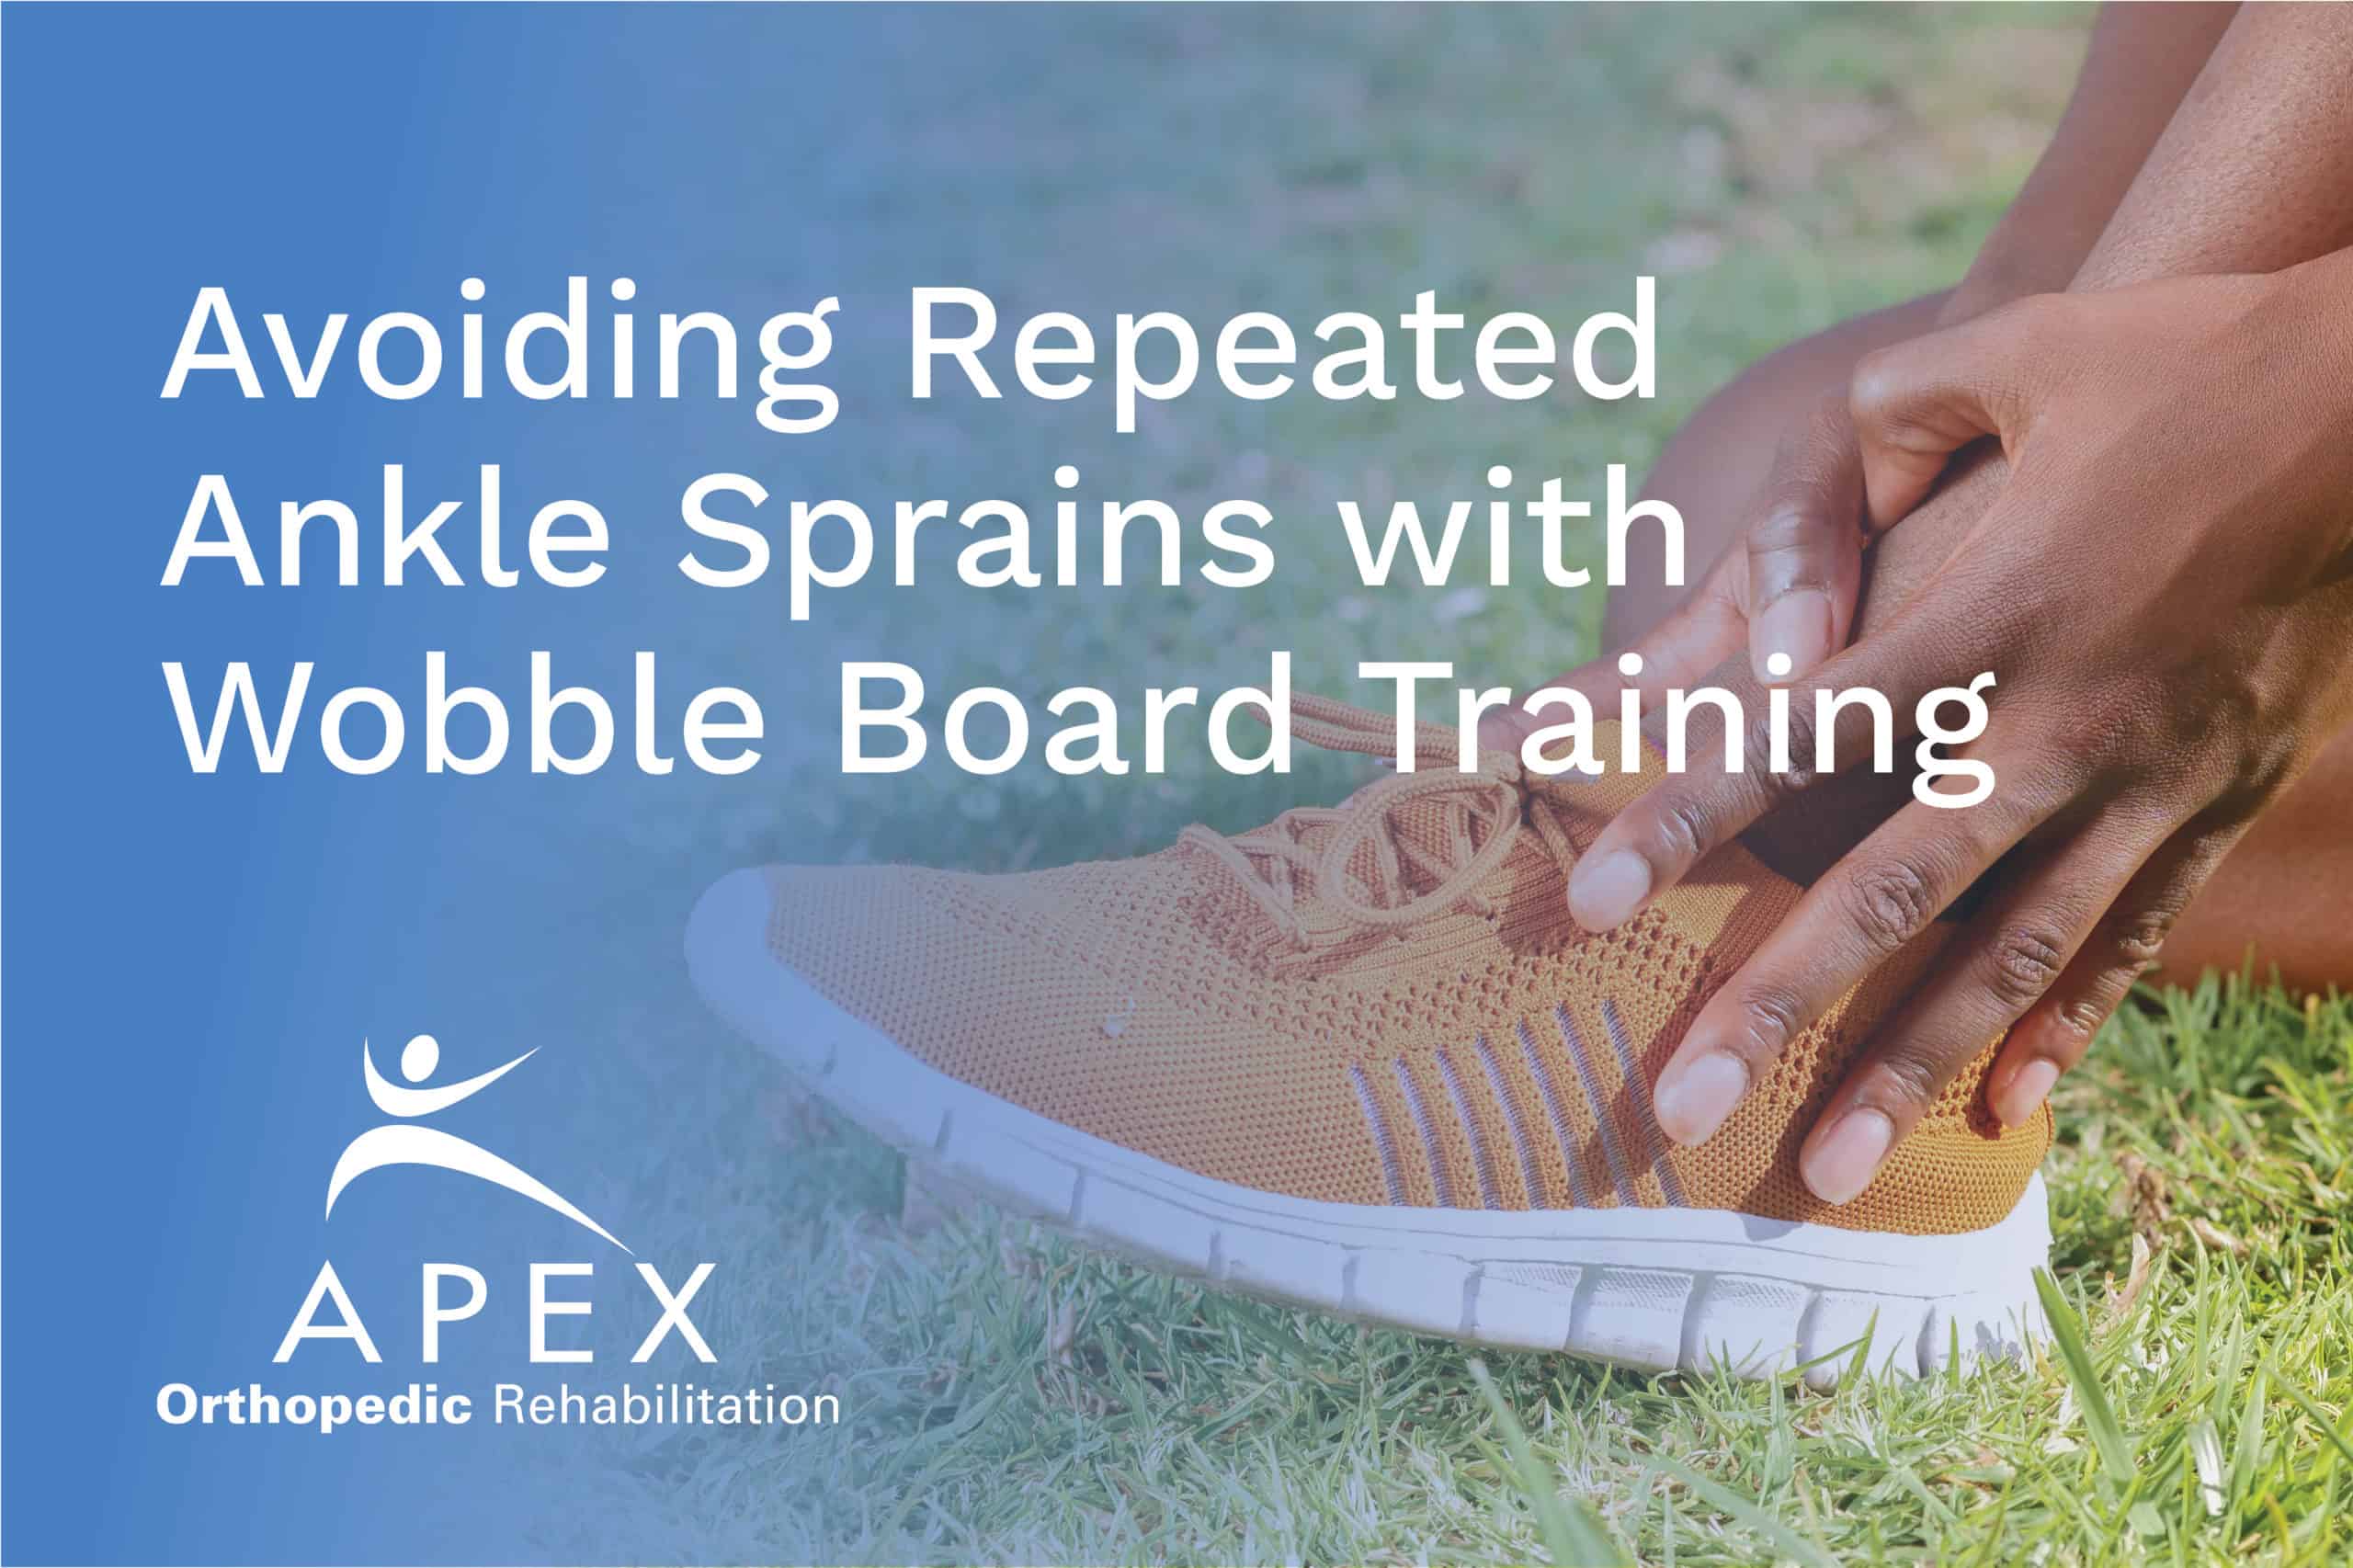 Avoiding Repeated Ankle Sprains with Wobble Board Training